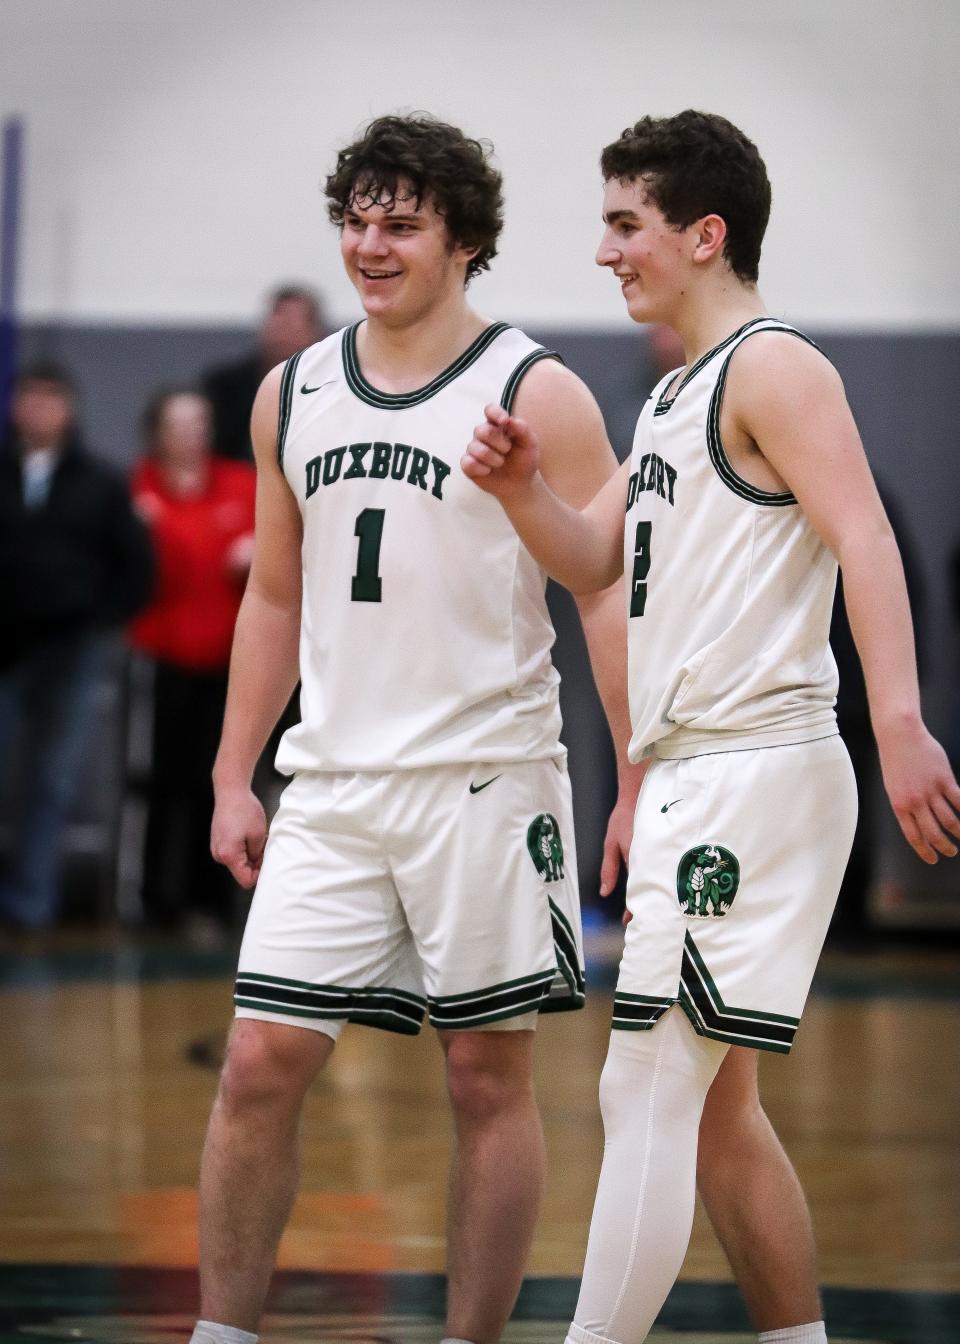 Duxbury's Alex Barlow, left, shares a smile with Trevor Jones during a game against Falmouth on Friday, Feb. 17, 2023.